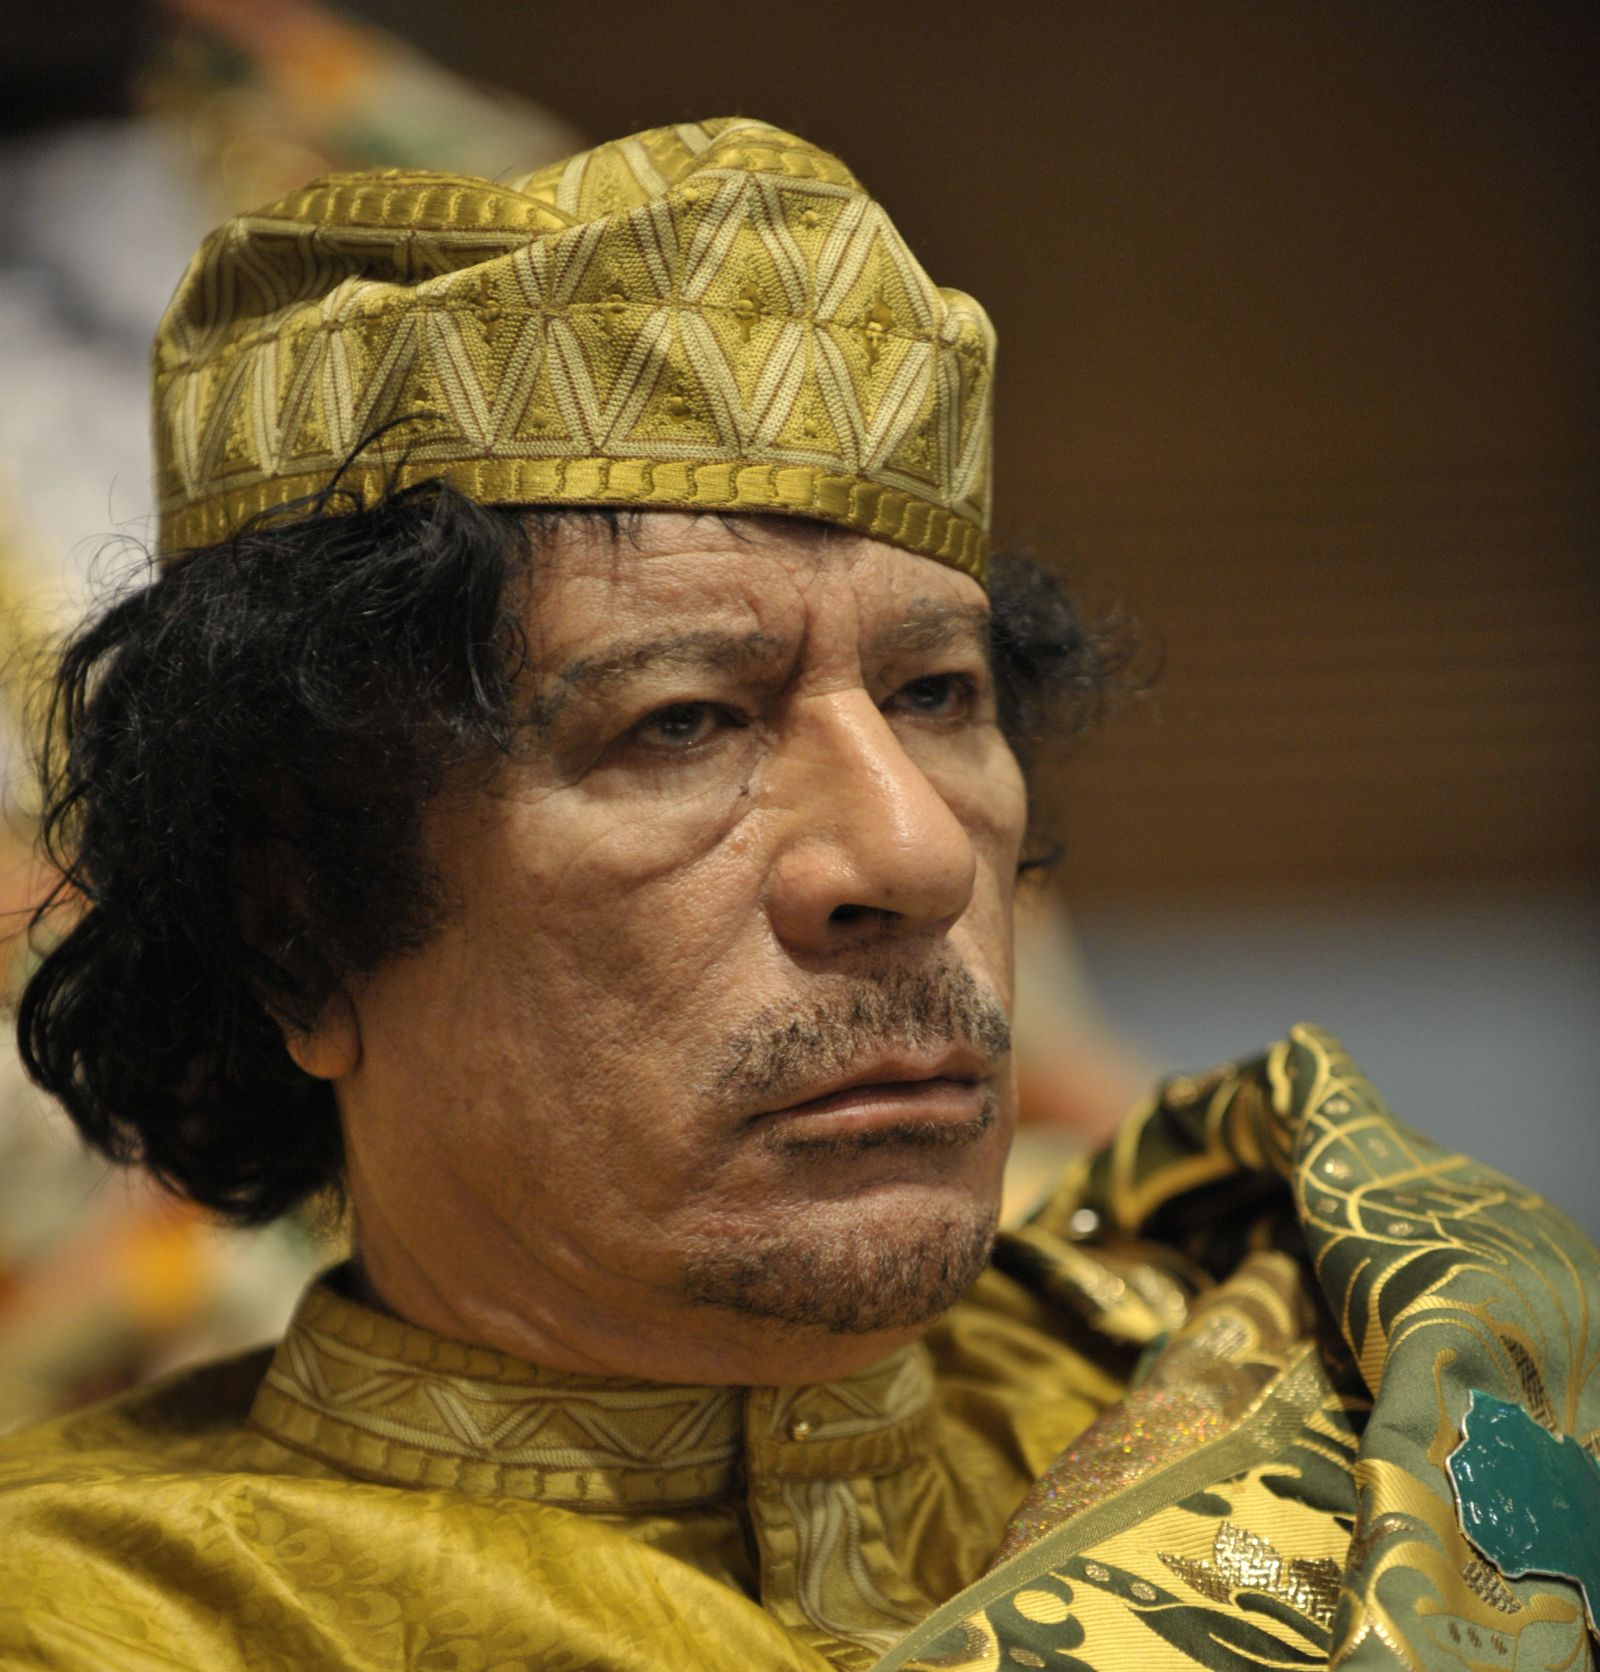 Muammar Qaddafi, the Libyan chief of state, attends the 12th African Union Summit in Addis Ababa, Ethiopia, Feb. 2, 2009. Qaddafi was elected chairman of the organization. (U.S. Navy photo by Mass Communication Specialist 2nd Class Jesse B. Awalt/Released)